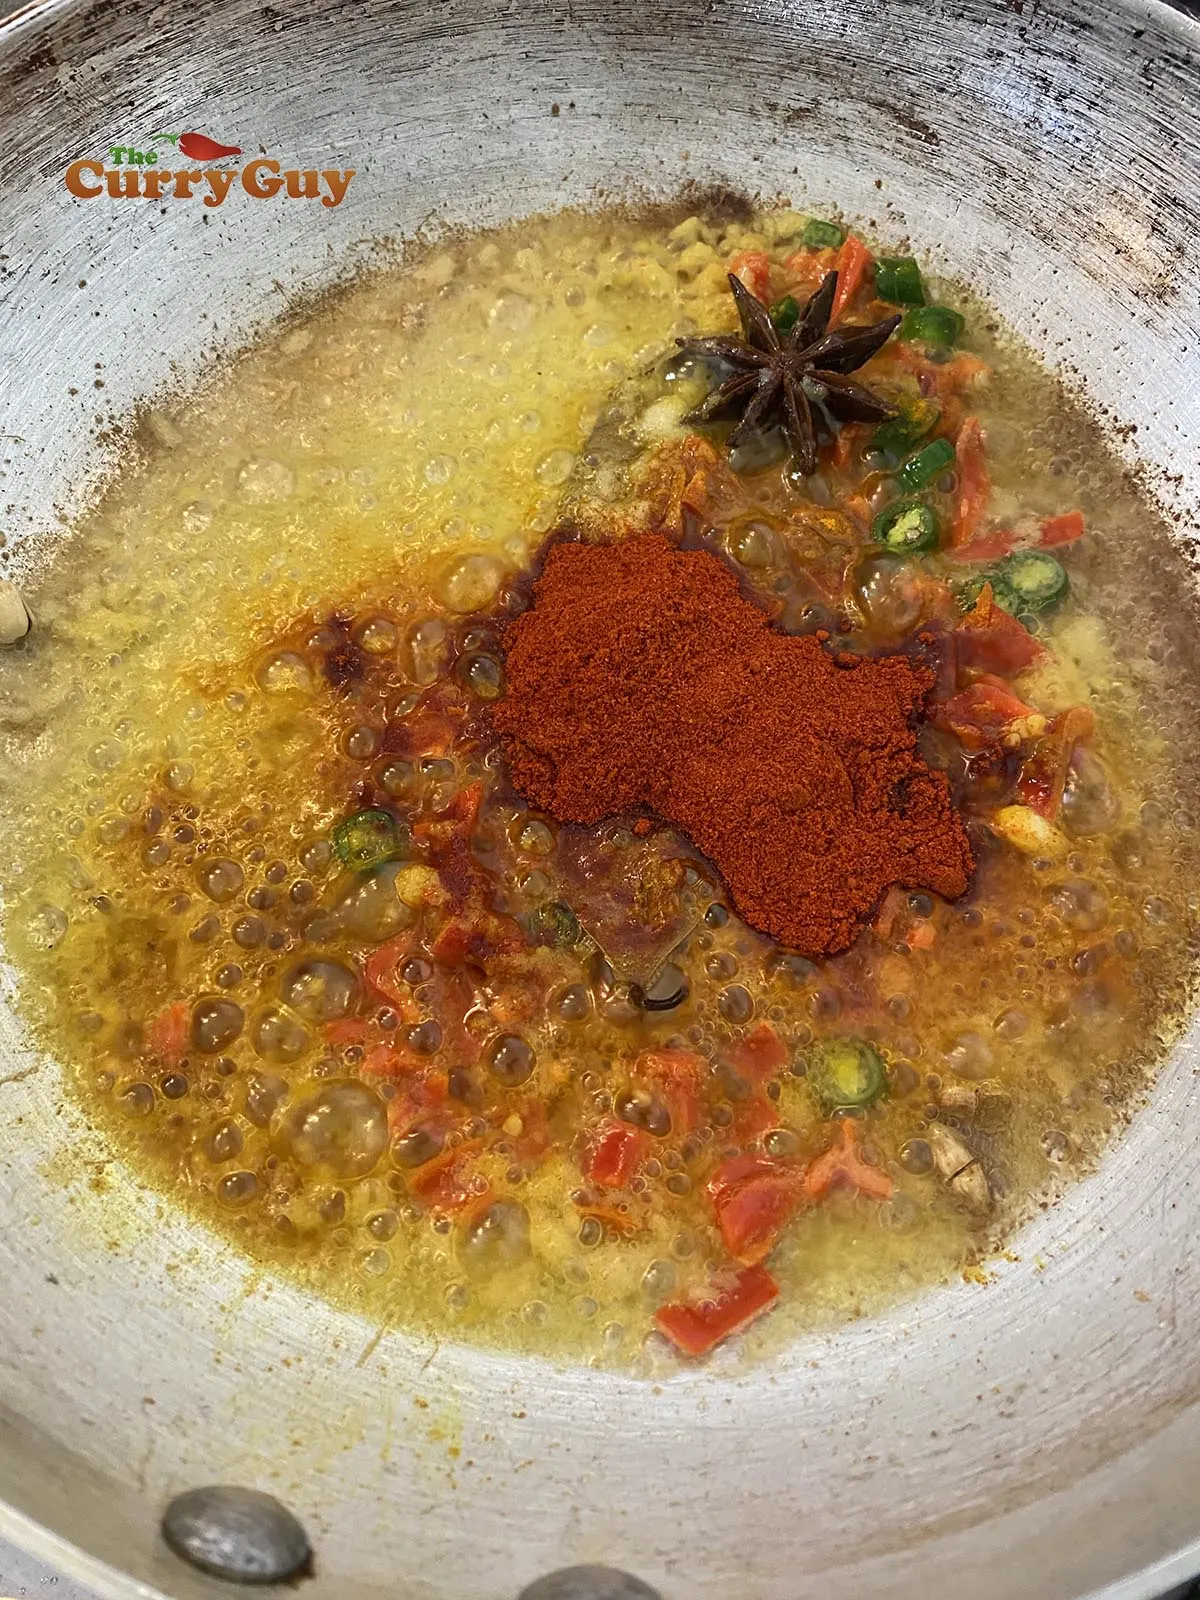 Adding chillies and ground spices